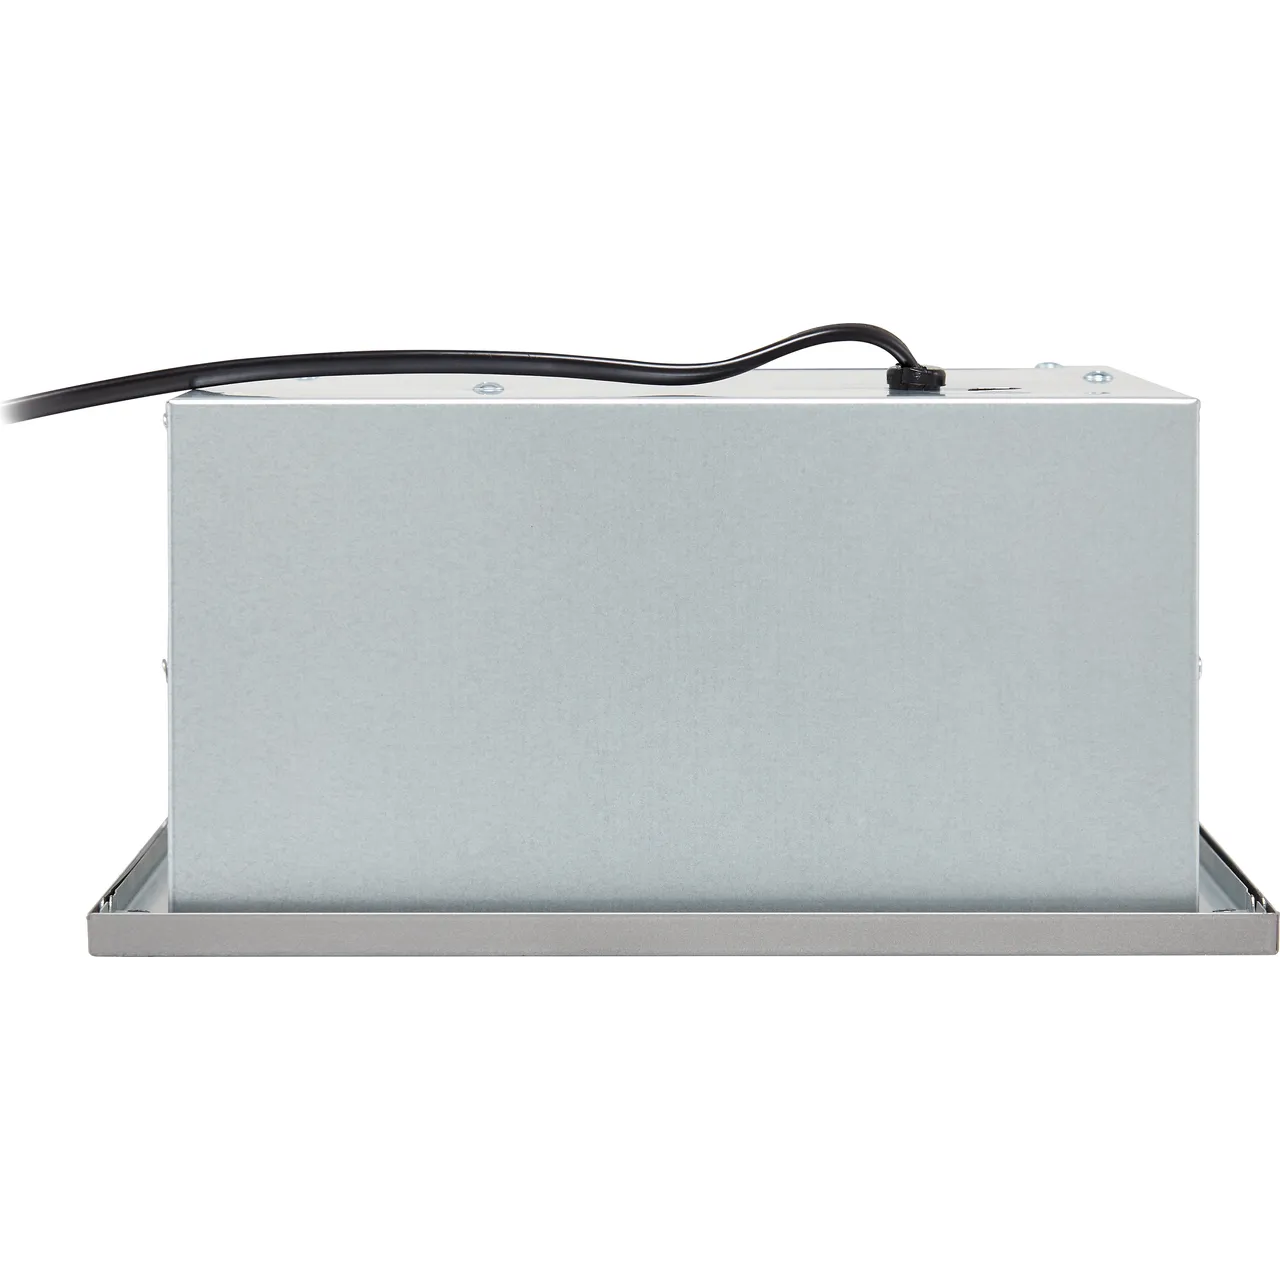 Candy Canopy Cooker Hood-Built-in-Stainless Steel 52cm Silver CBG52SX 0101